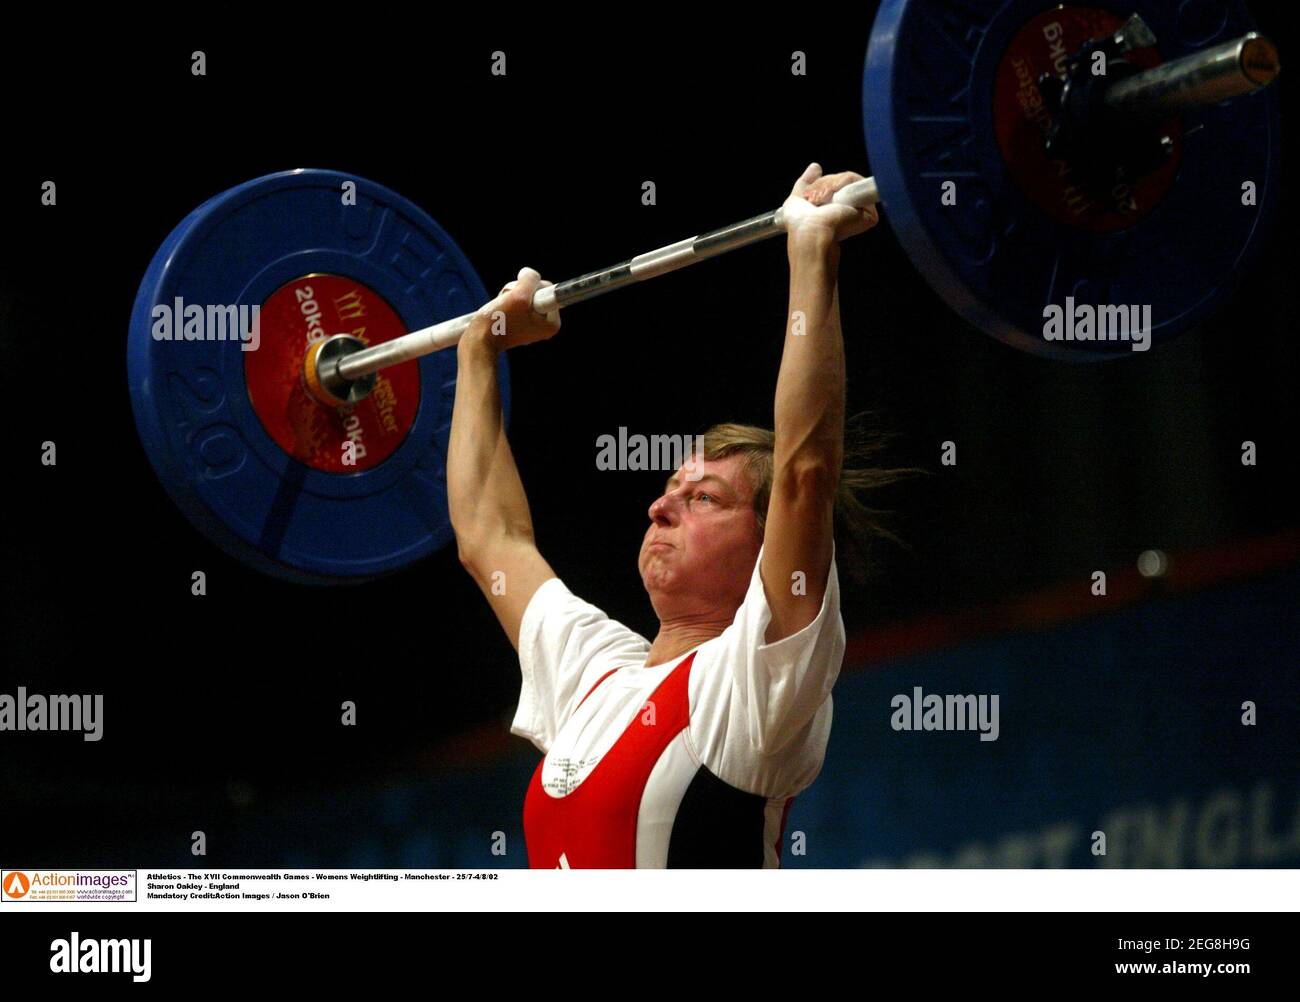 Weightlifting - The XVII Commonwealth Games - Women's Weightlifting -  Manchester - 25/7-4/8/02 Sharon Oakley - England Mandatory Credit:Action  Images / Jason O'Brien Stock Photo - Alamy